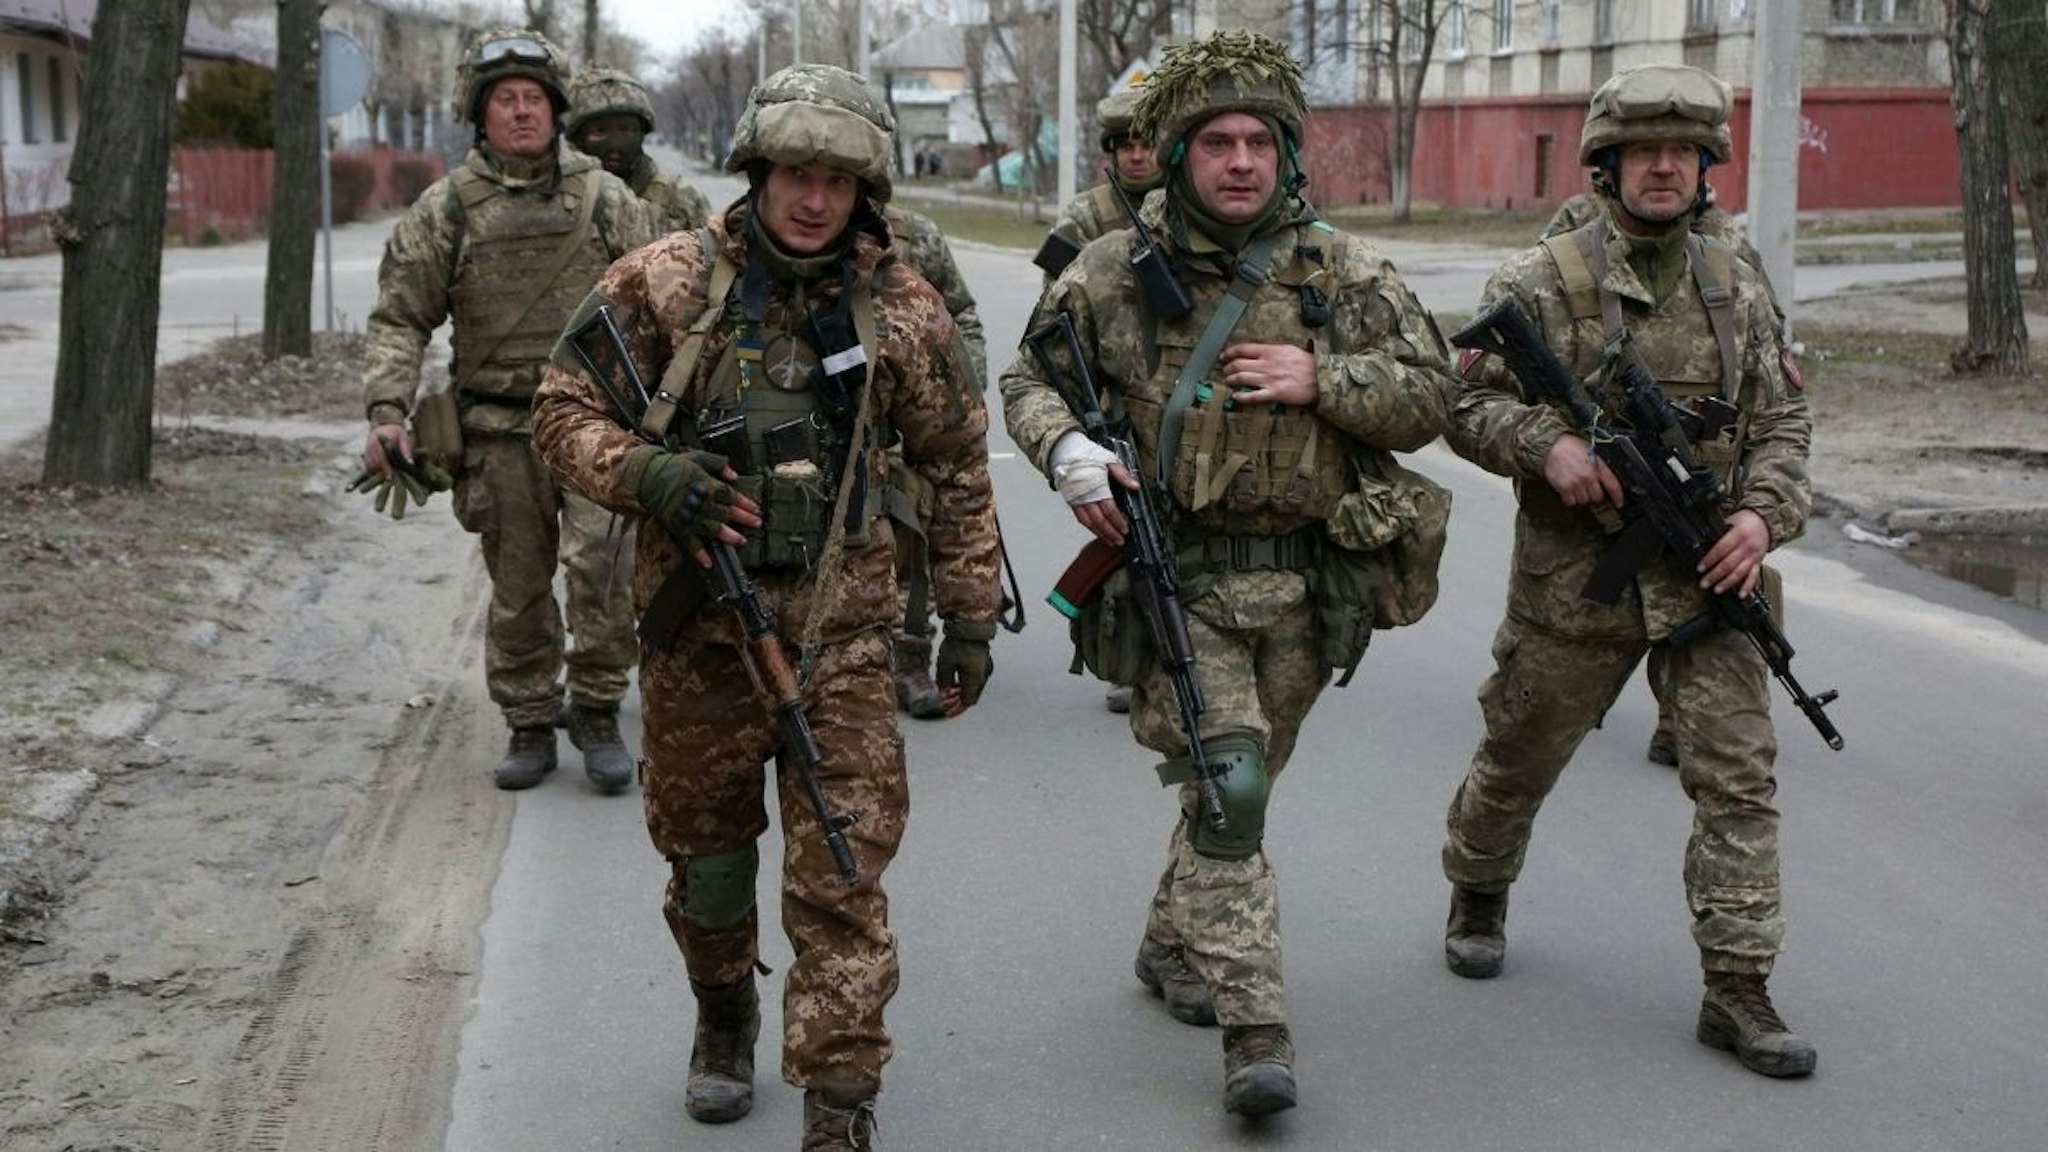 Servicemen of Ukrainian Military Forces walk in the small town of Sievierodonetsk, Lugansk Oblast, on February 27, 2022.